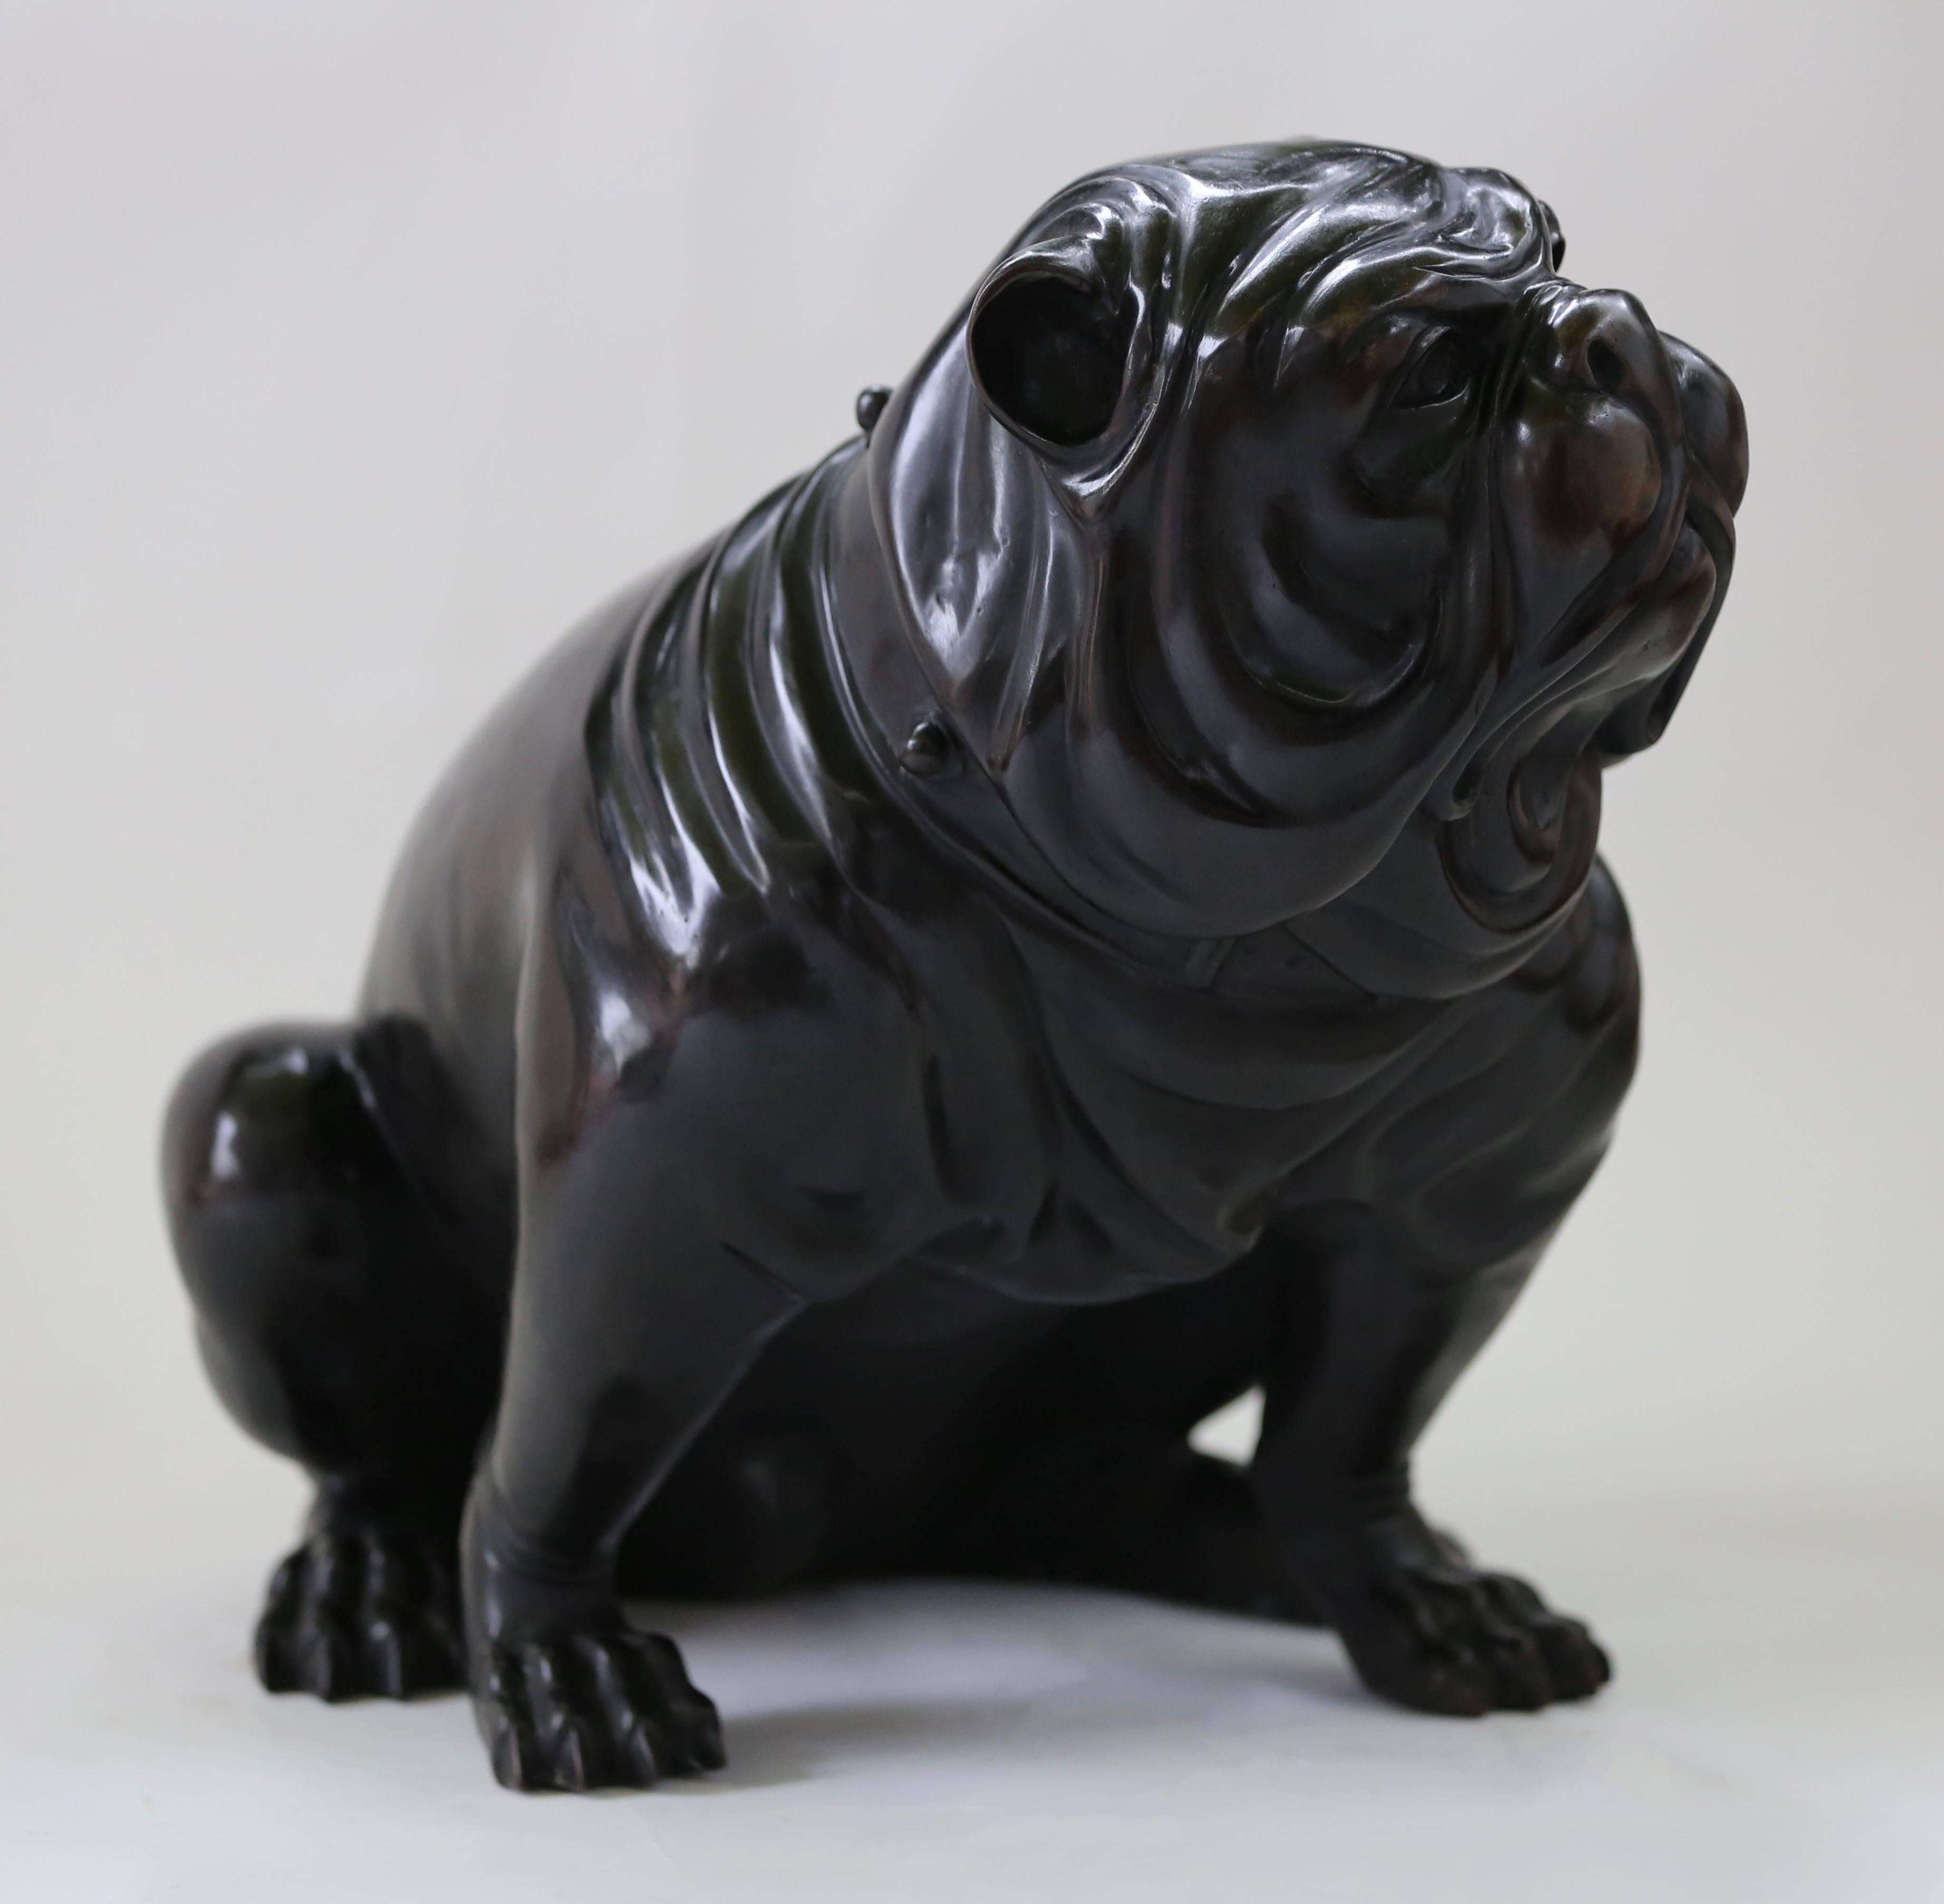 Stunning vintage bronze real size English bulldog sculpture
Very good manufacture, beautiful bronze quality and stunning details.
 